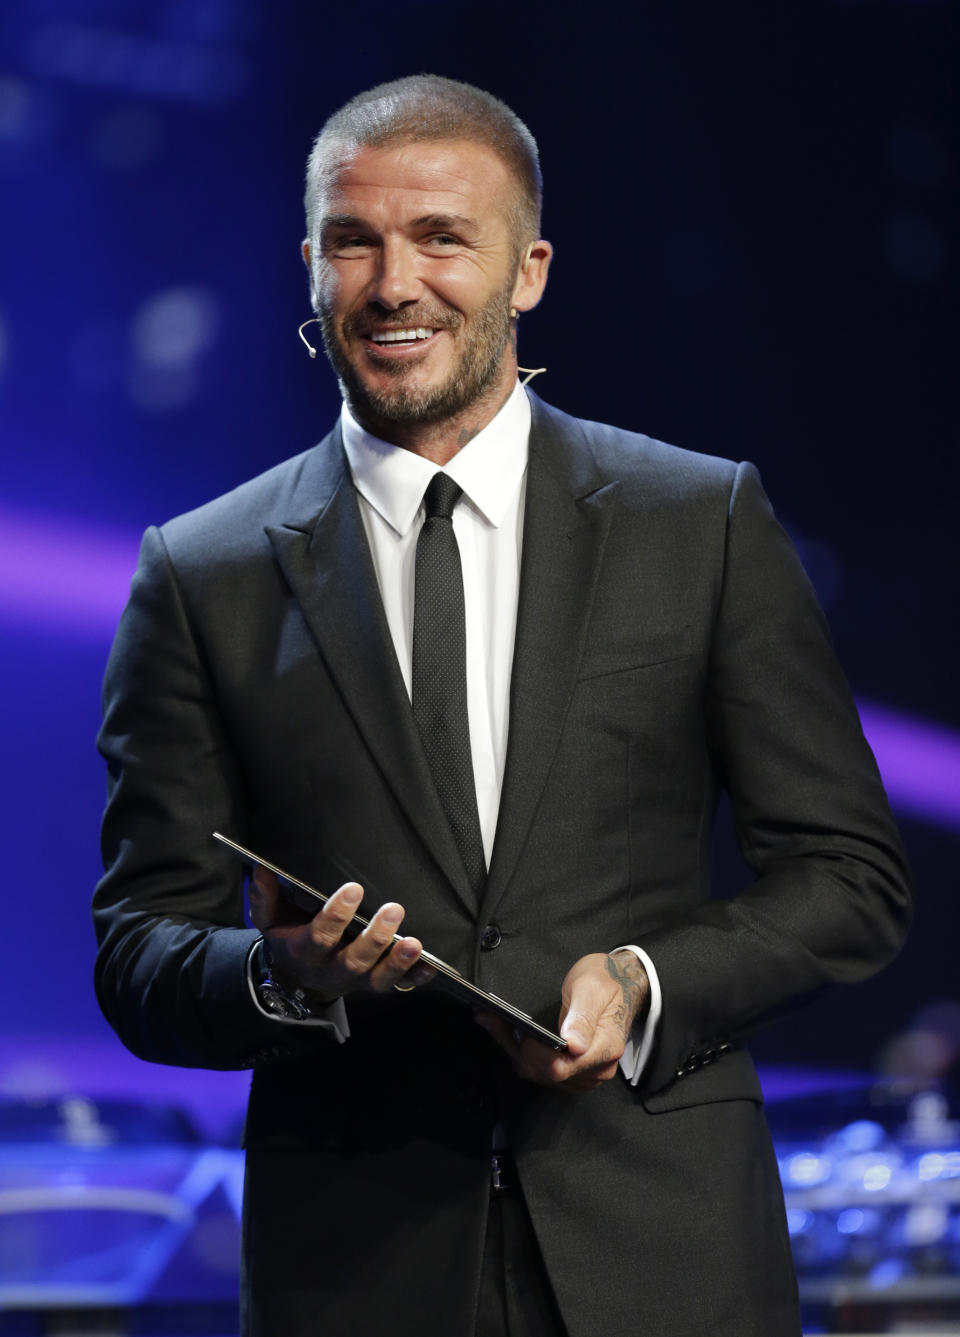 UEFA President's Award winner David Beckham smiles on stage during for the UEFA Champions League draw at the Grimaldi Forum, in Monaco, Thursday, Aug. 30, 2018. (AP Photo/Claude Paris)